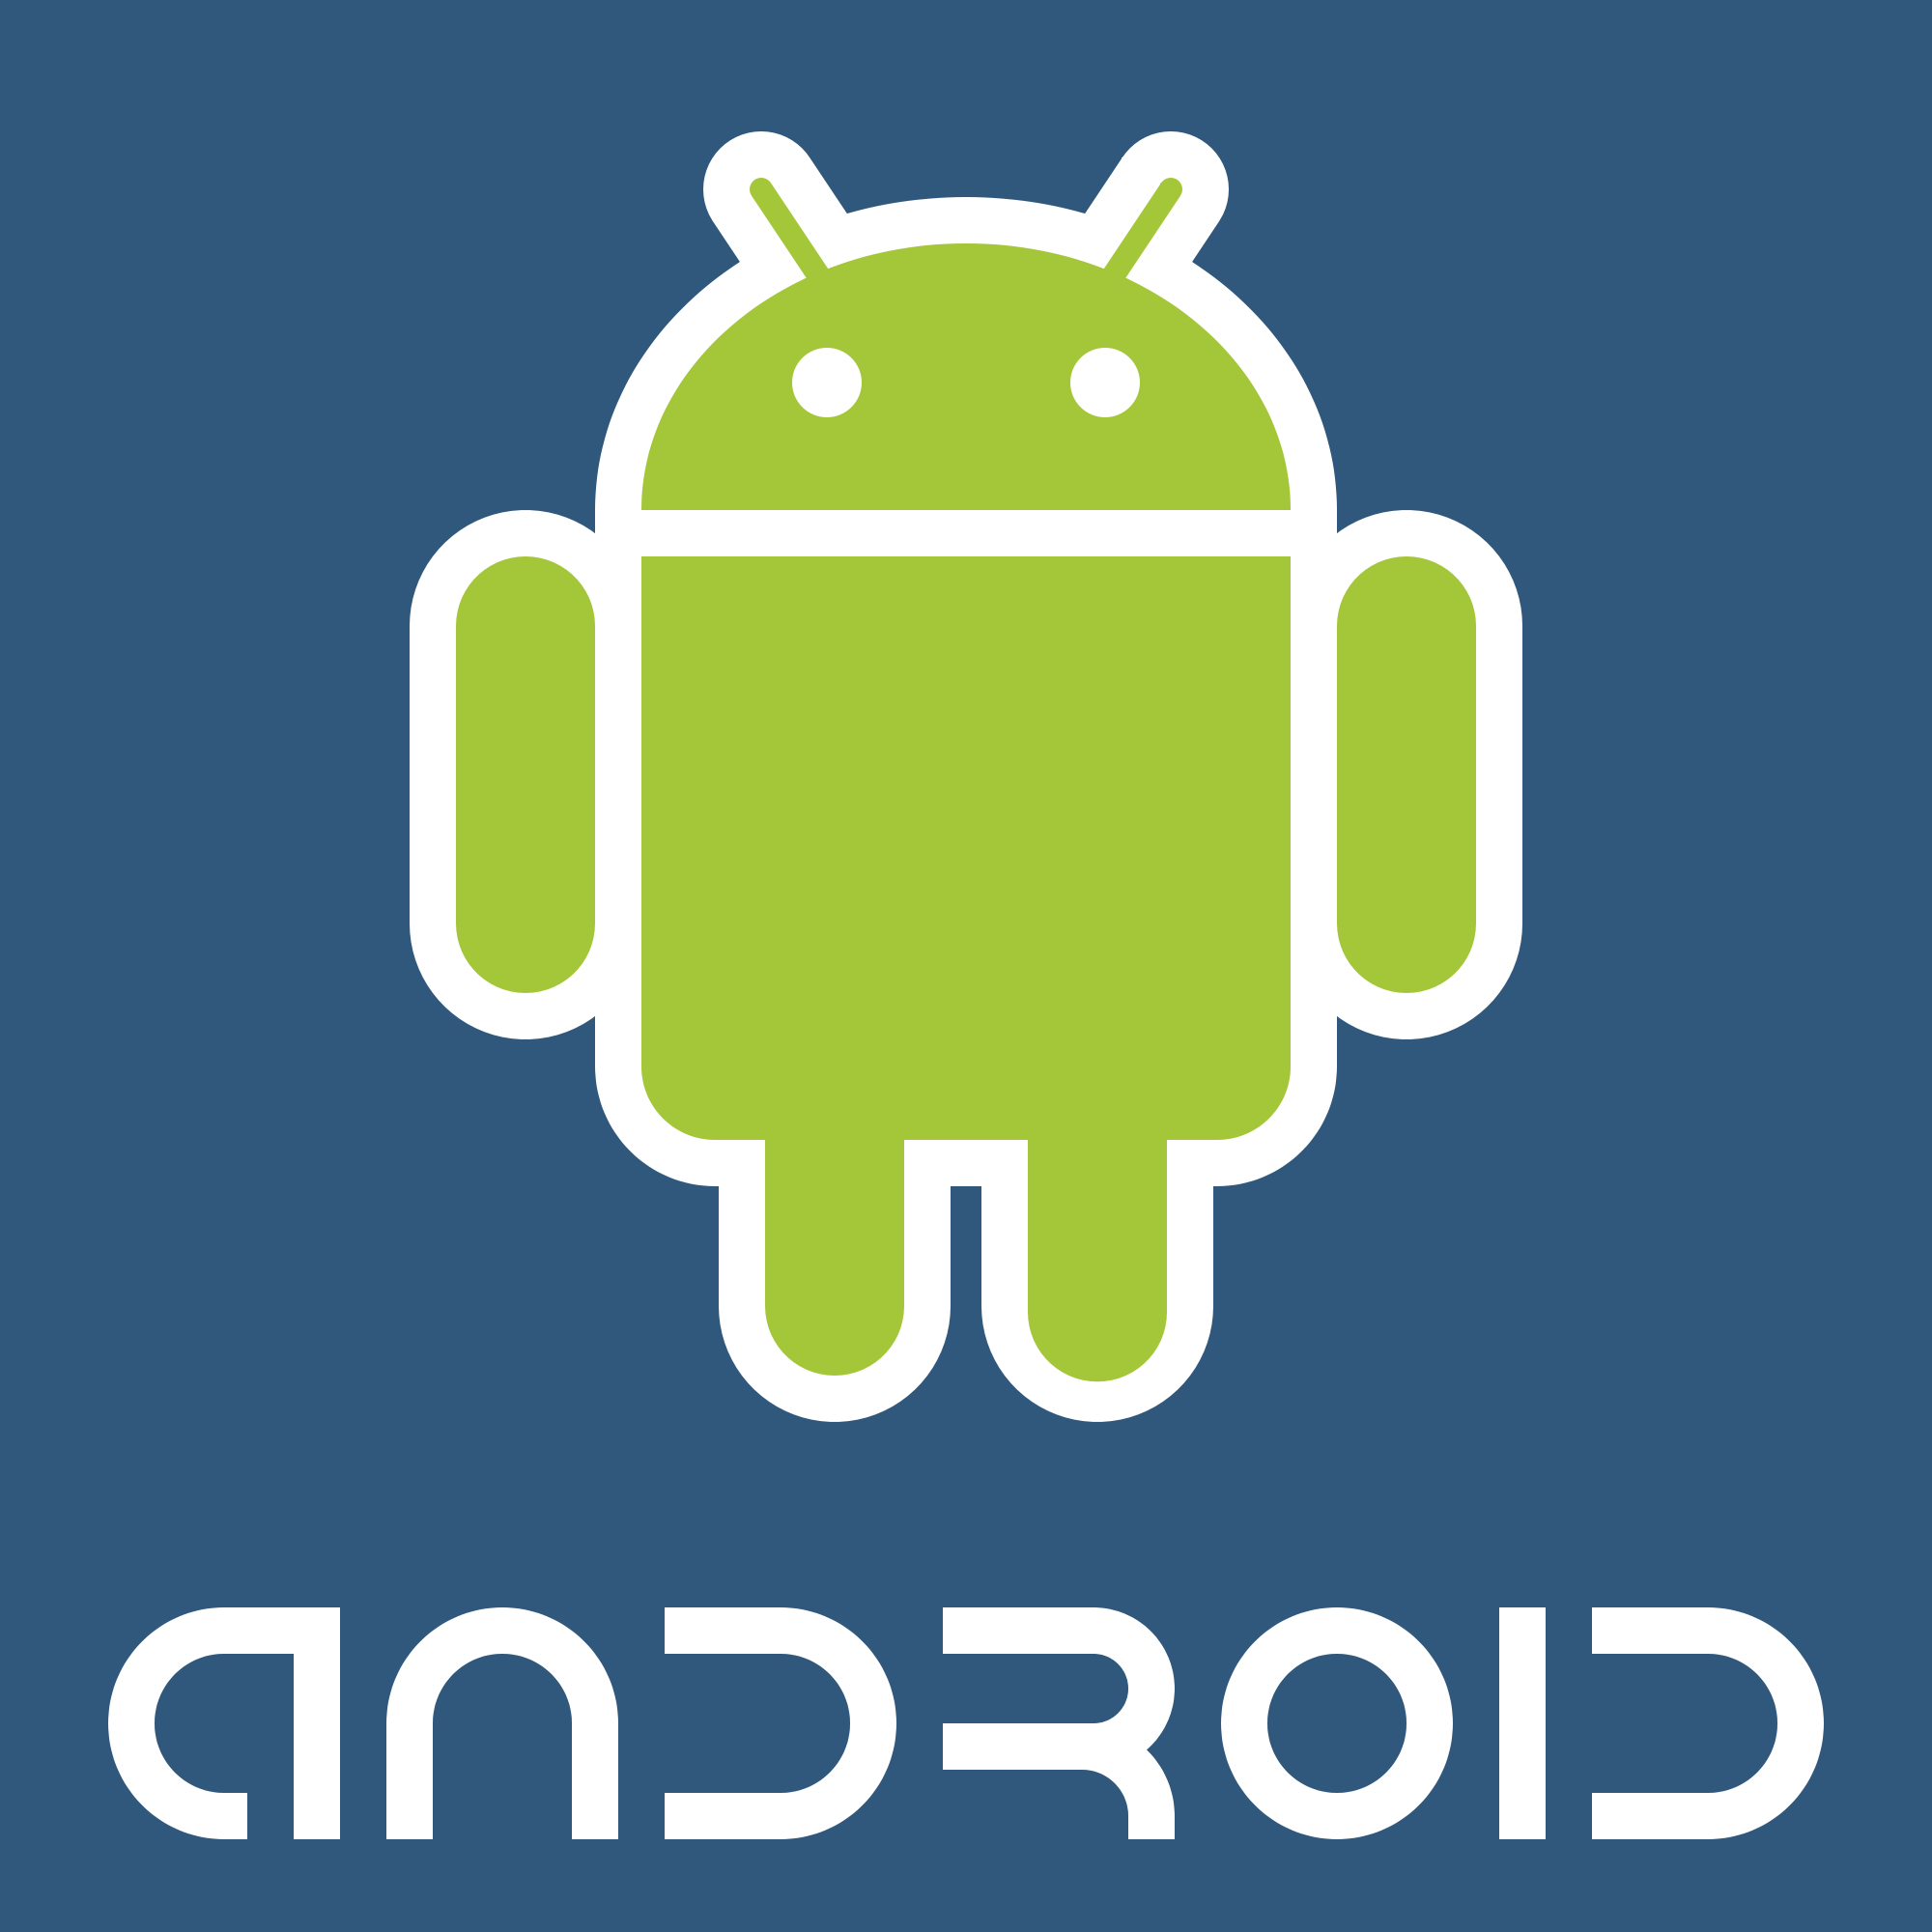 Android Logo : Android Logo Vector~ Format Cdr, Ai, Eps, Svg, PDF, PNG - You can download in.ai ...